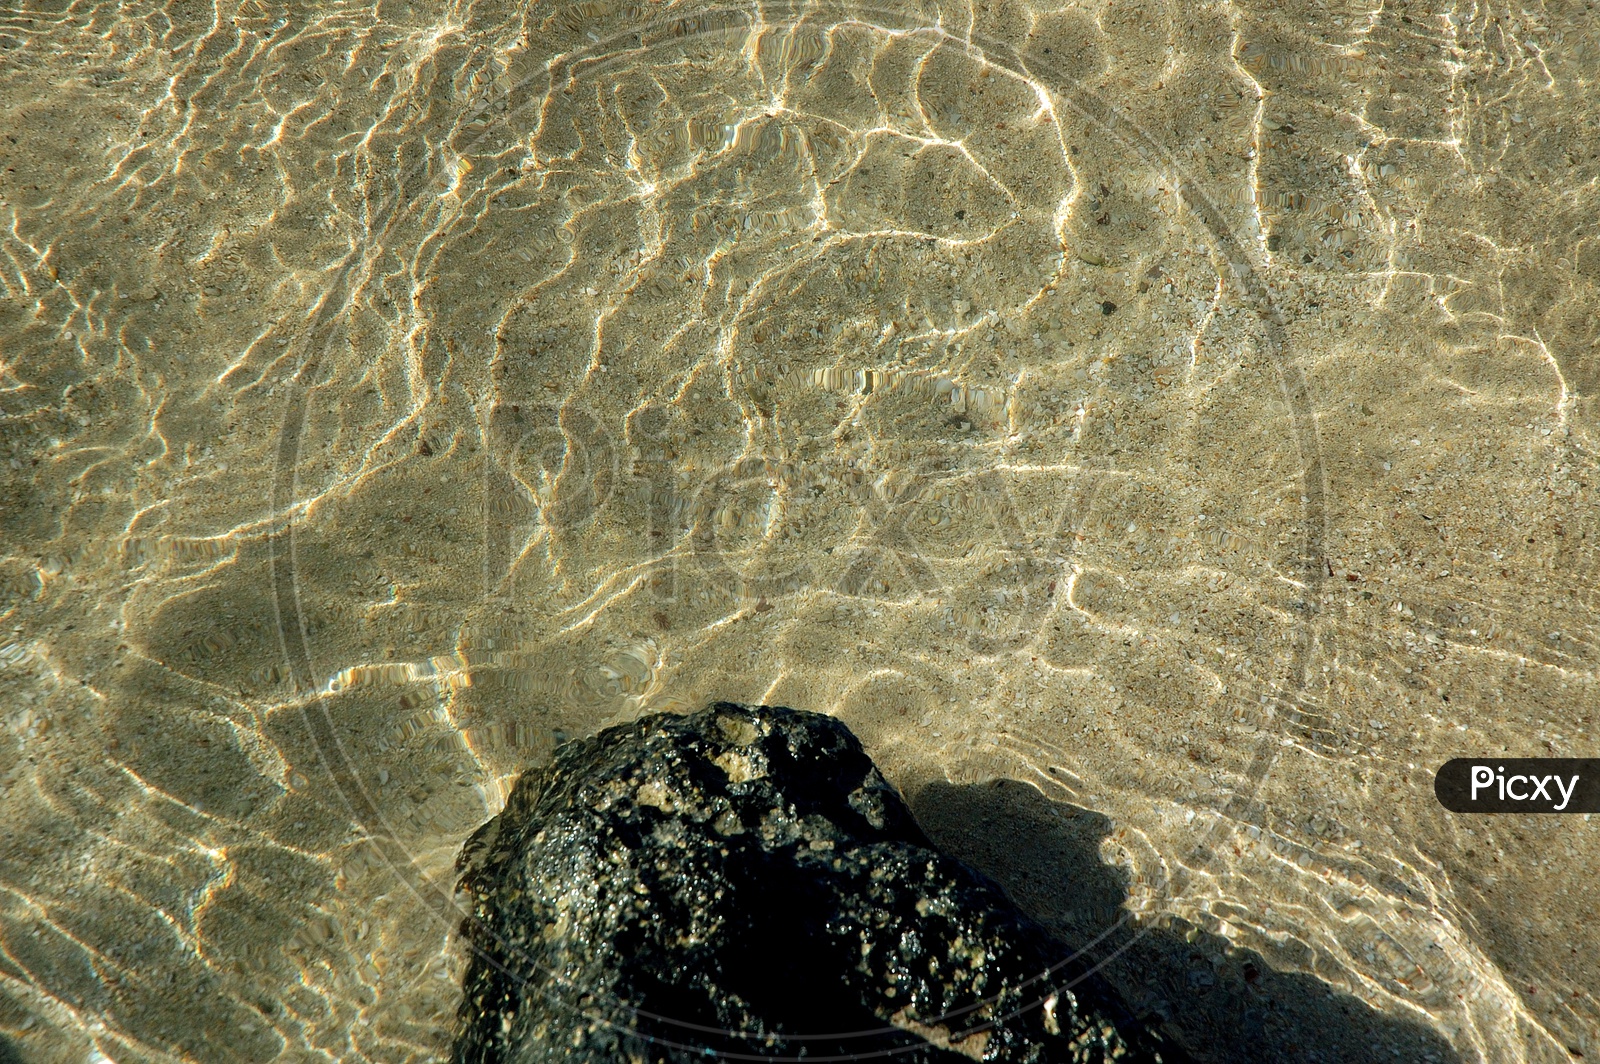 Transparent water surface on the sand